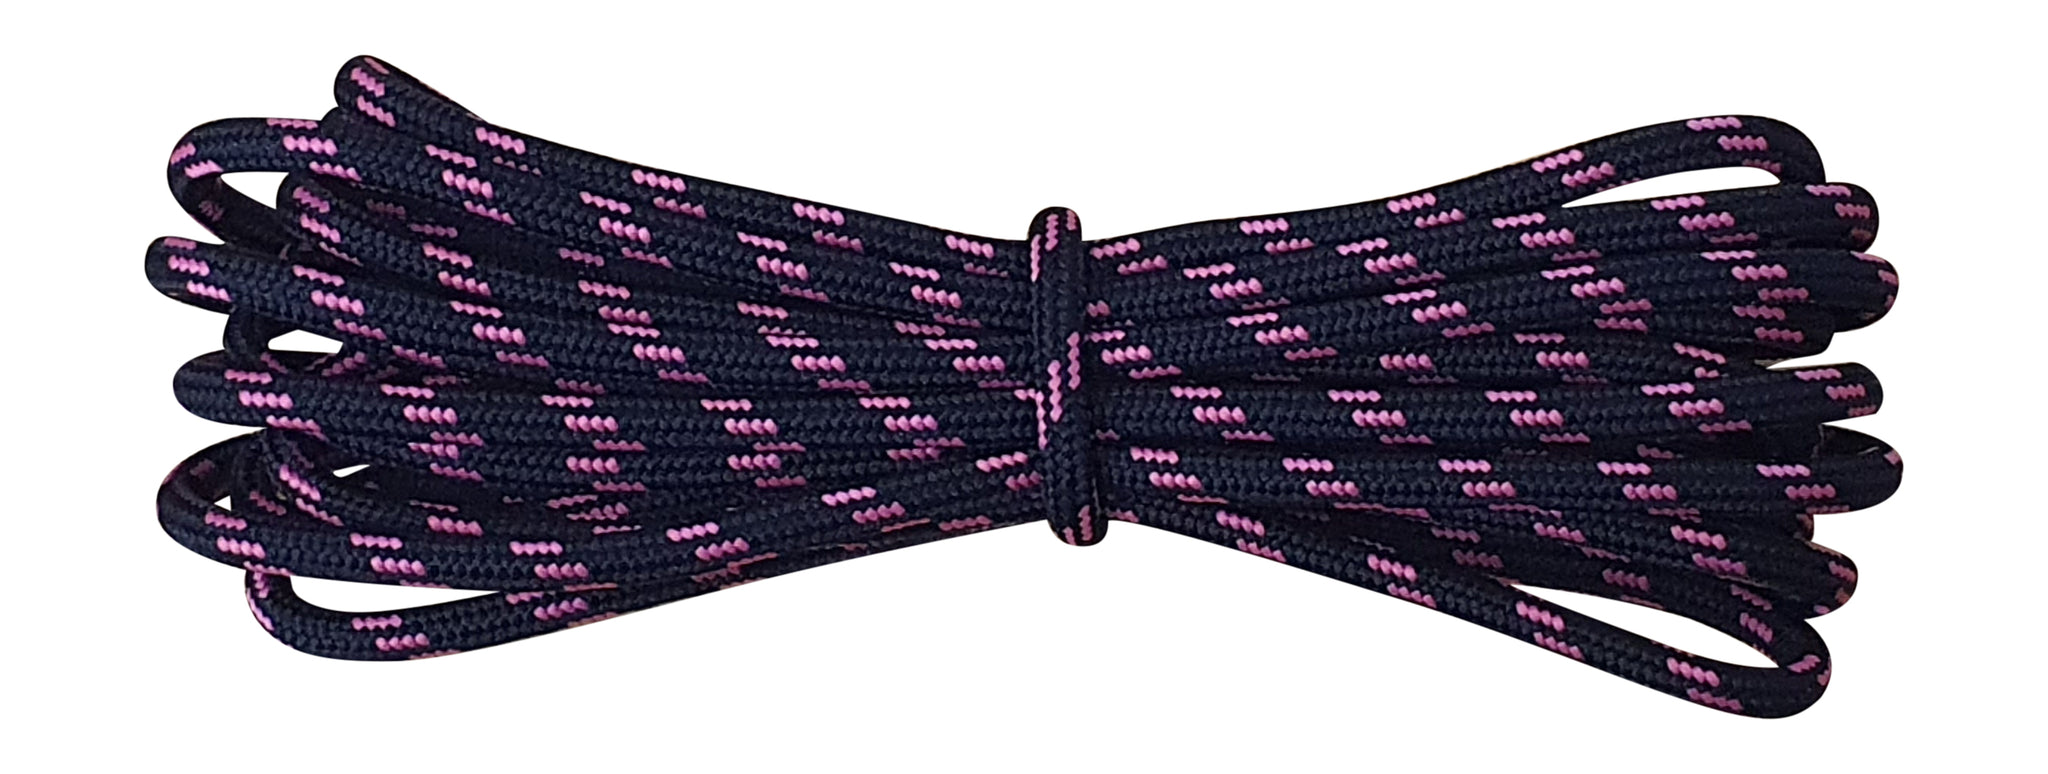 Strong Round Boot Laces Black with Pink flecks for hiking or walking  3.5 mm - fabmania shoe laces